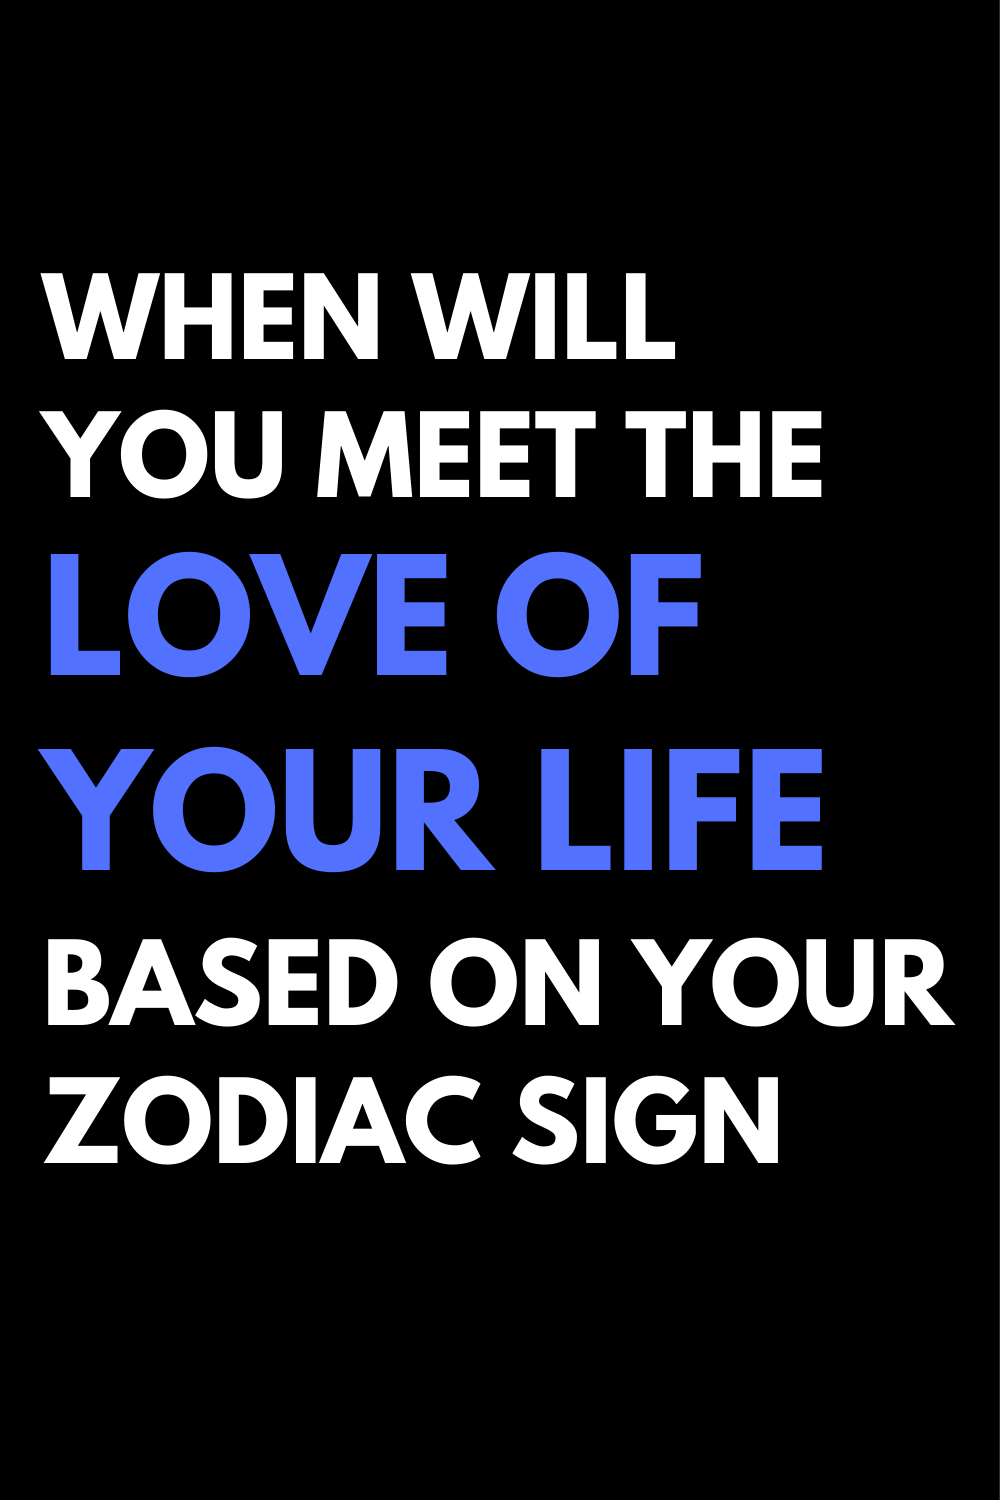 When Will You Meet The Love Of Your Life Based On Your Zodiac Sign